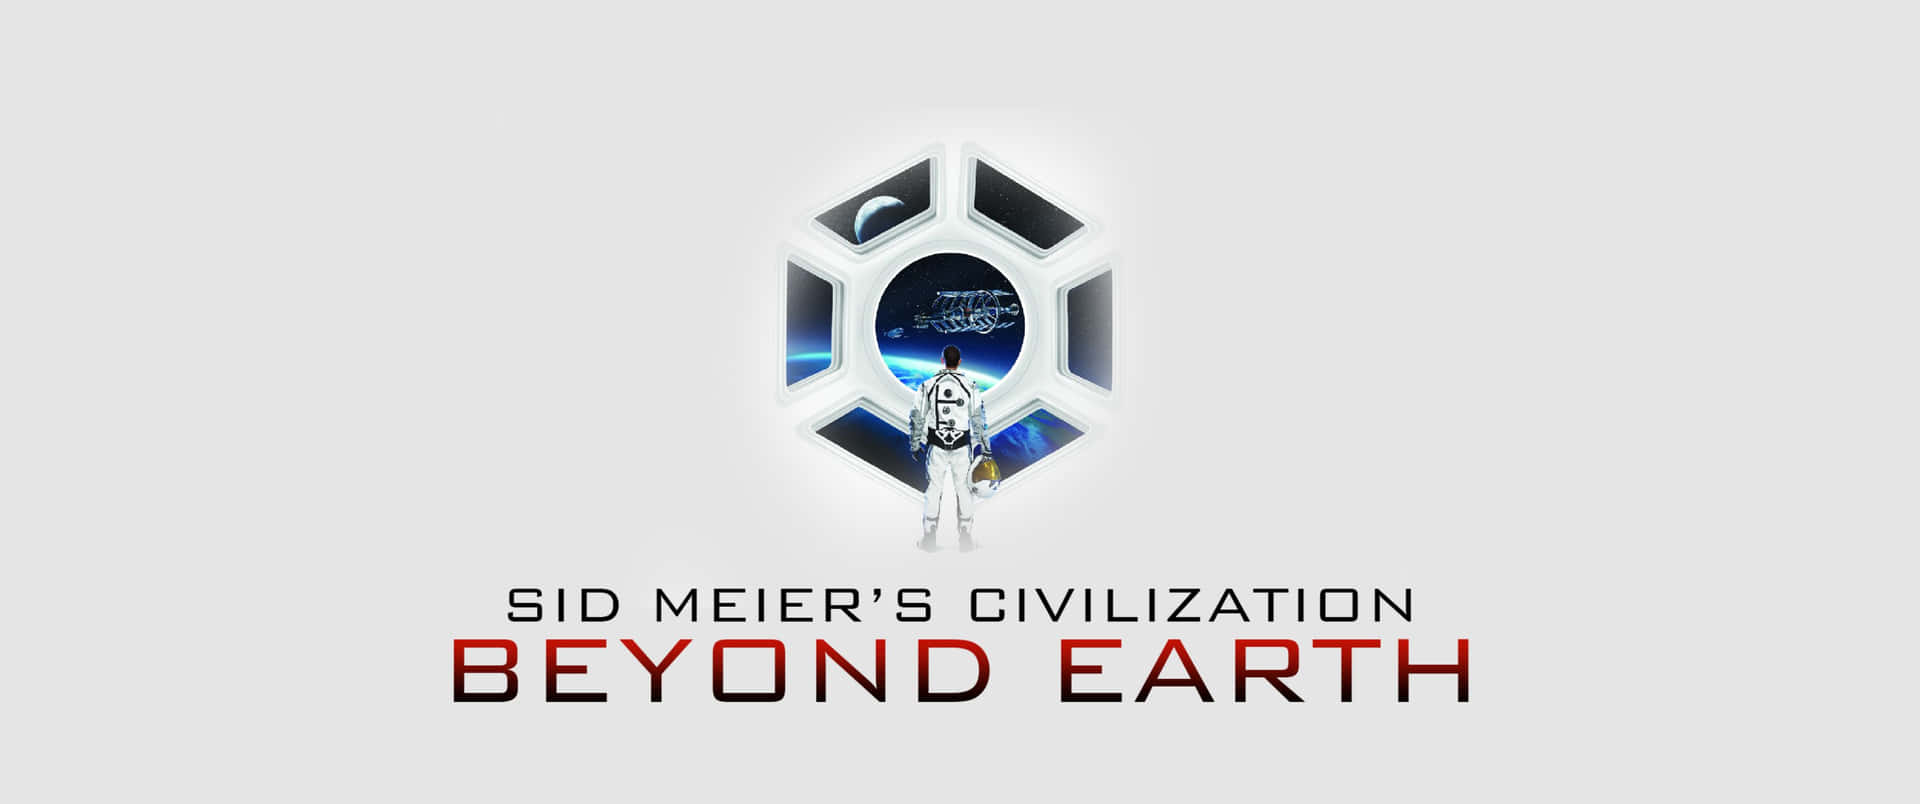 Mesmerizing 3440x1440p Screen Background of Civilization: Beyond Earth Game Scene.